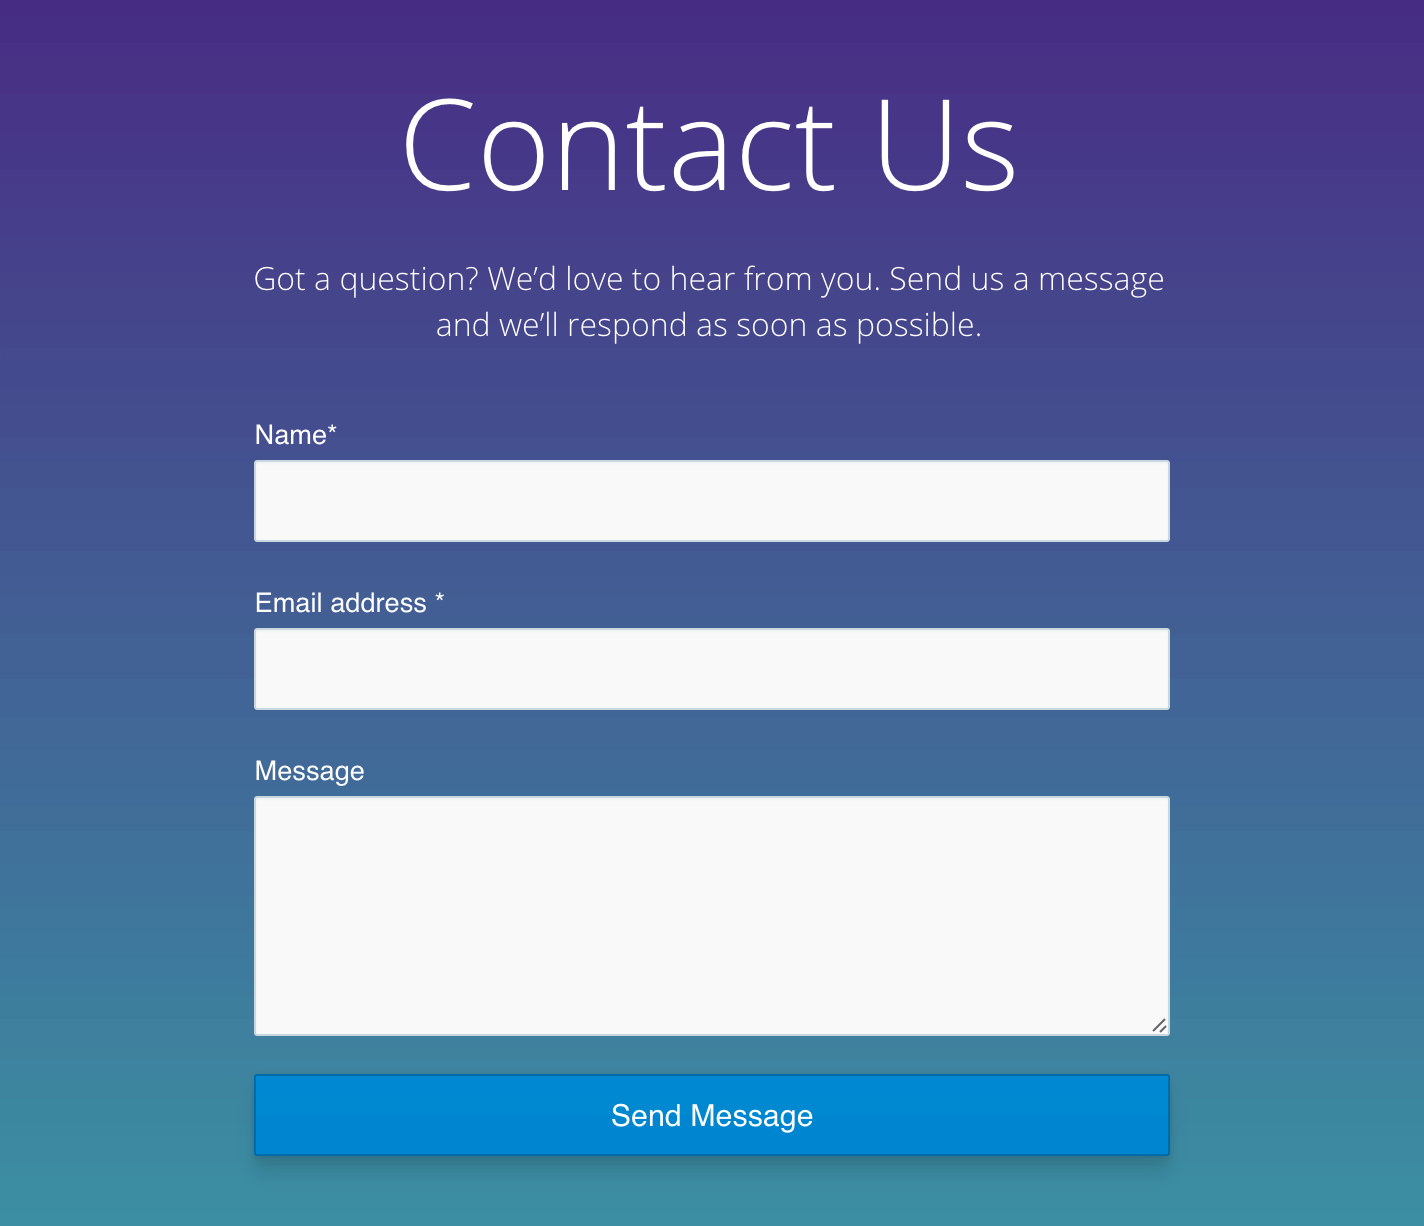 Simple Contact Form Example